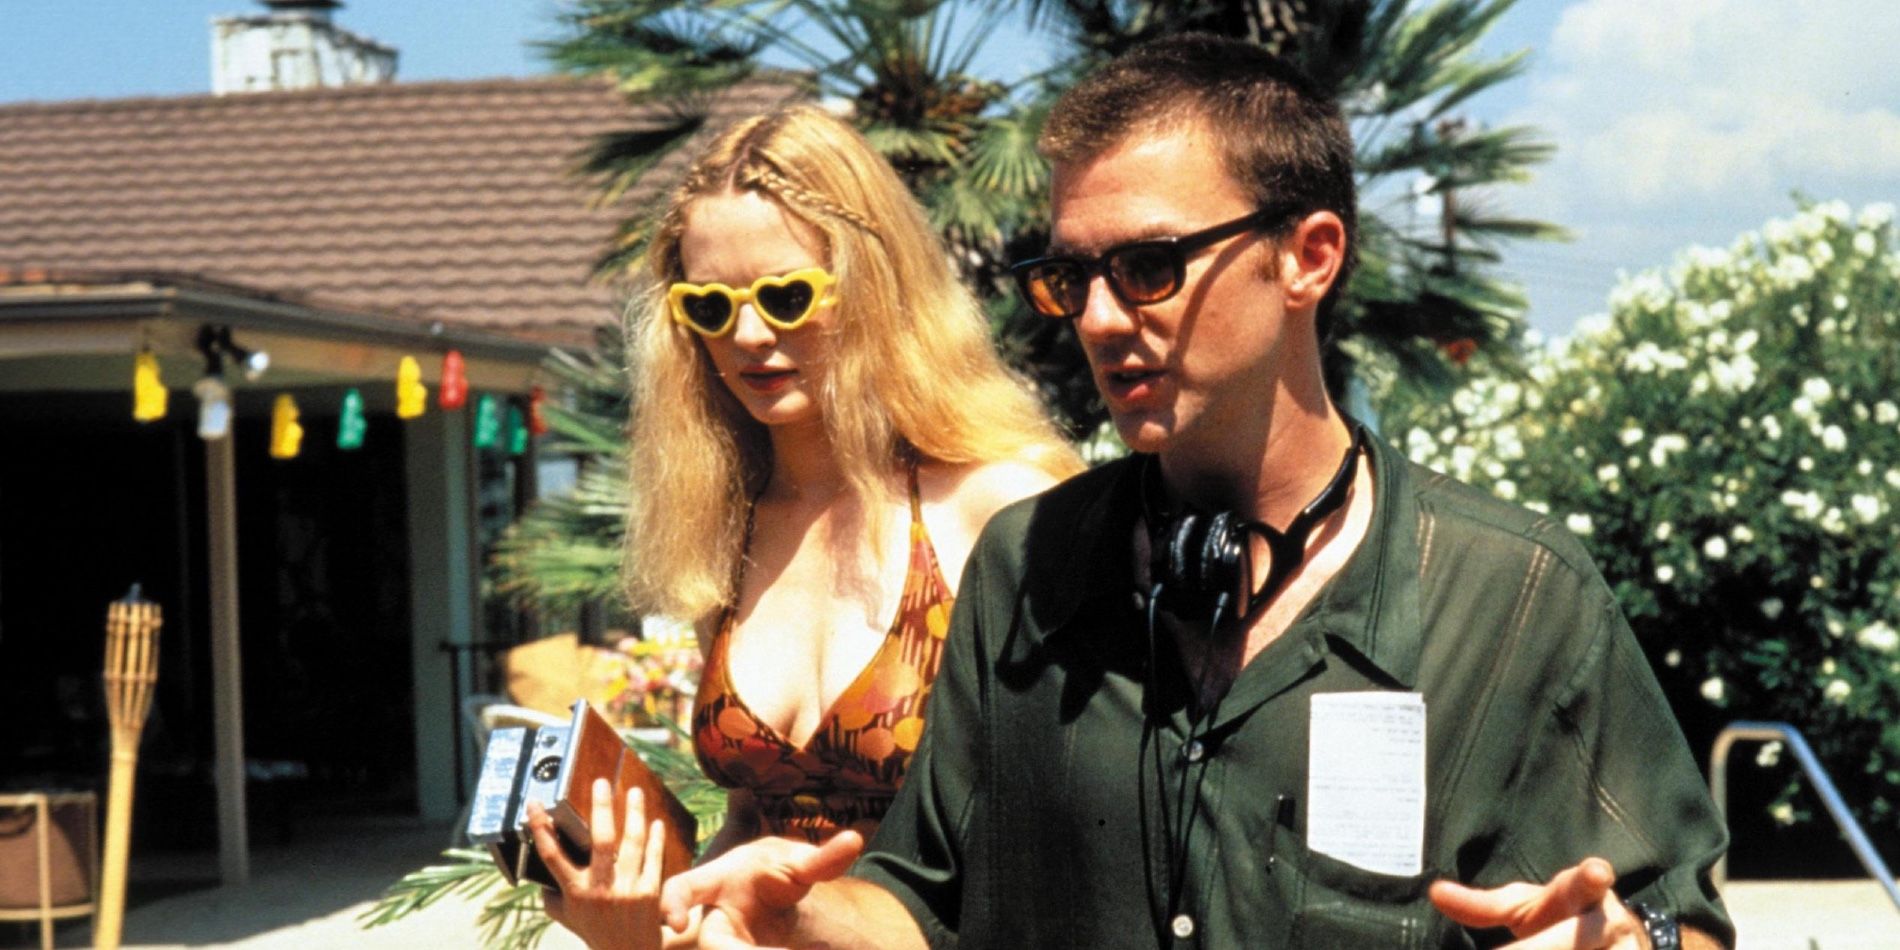 Paul Thomas Anderson directing Boogie Nights with Heather Graham behind him